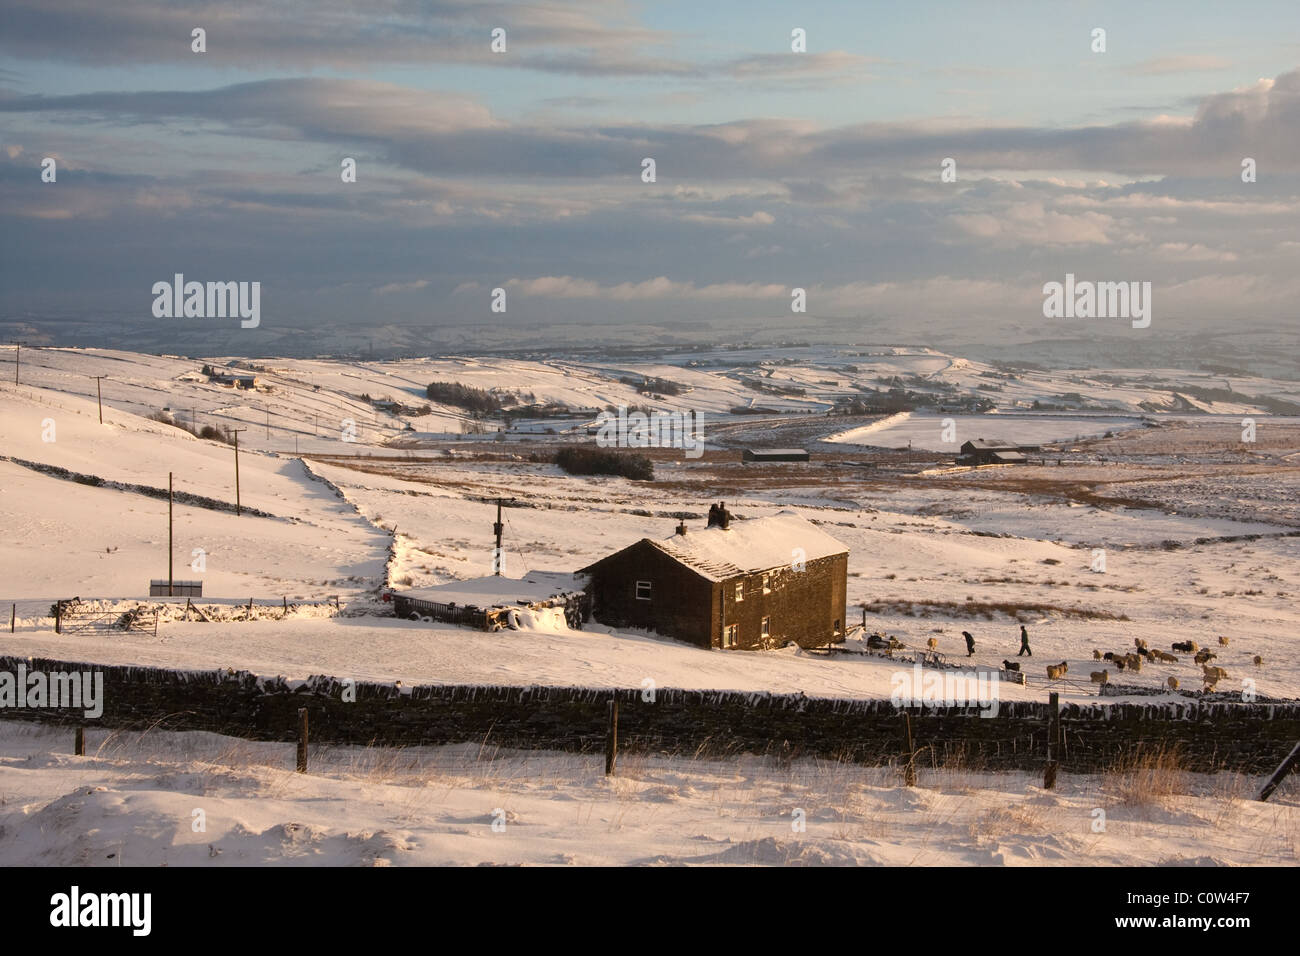 Farmers and sheep by farmhouse in wintry Pennine hills Stock Photo